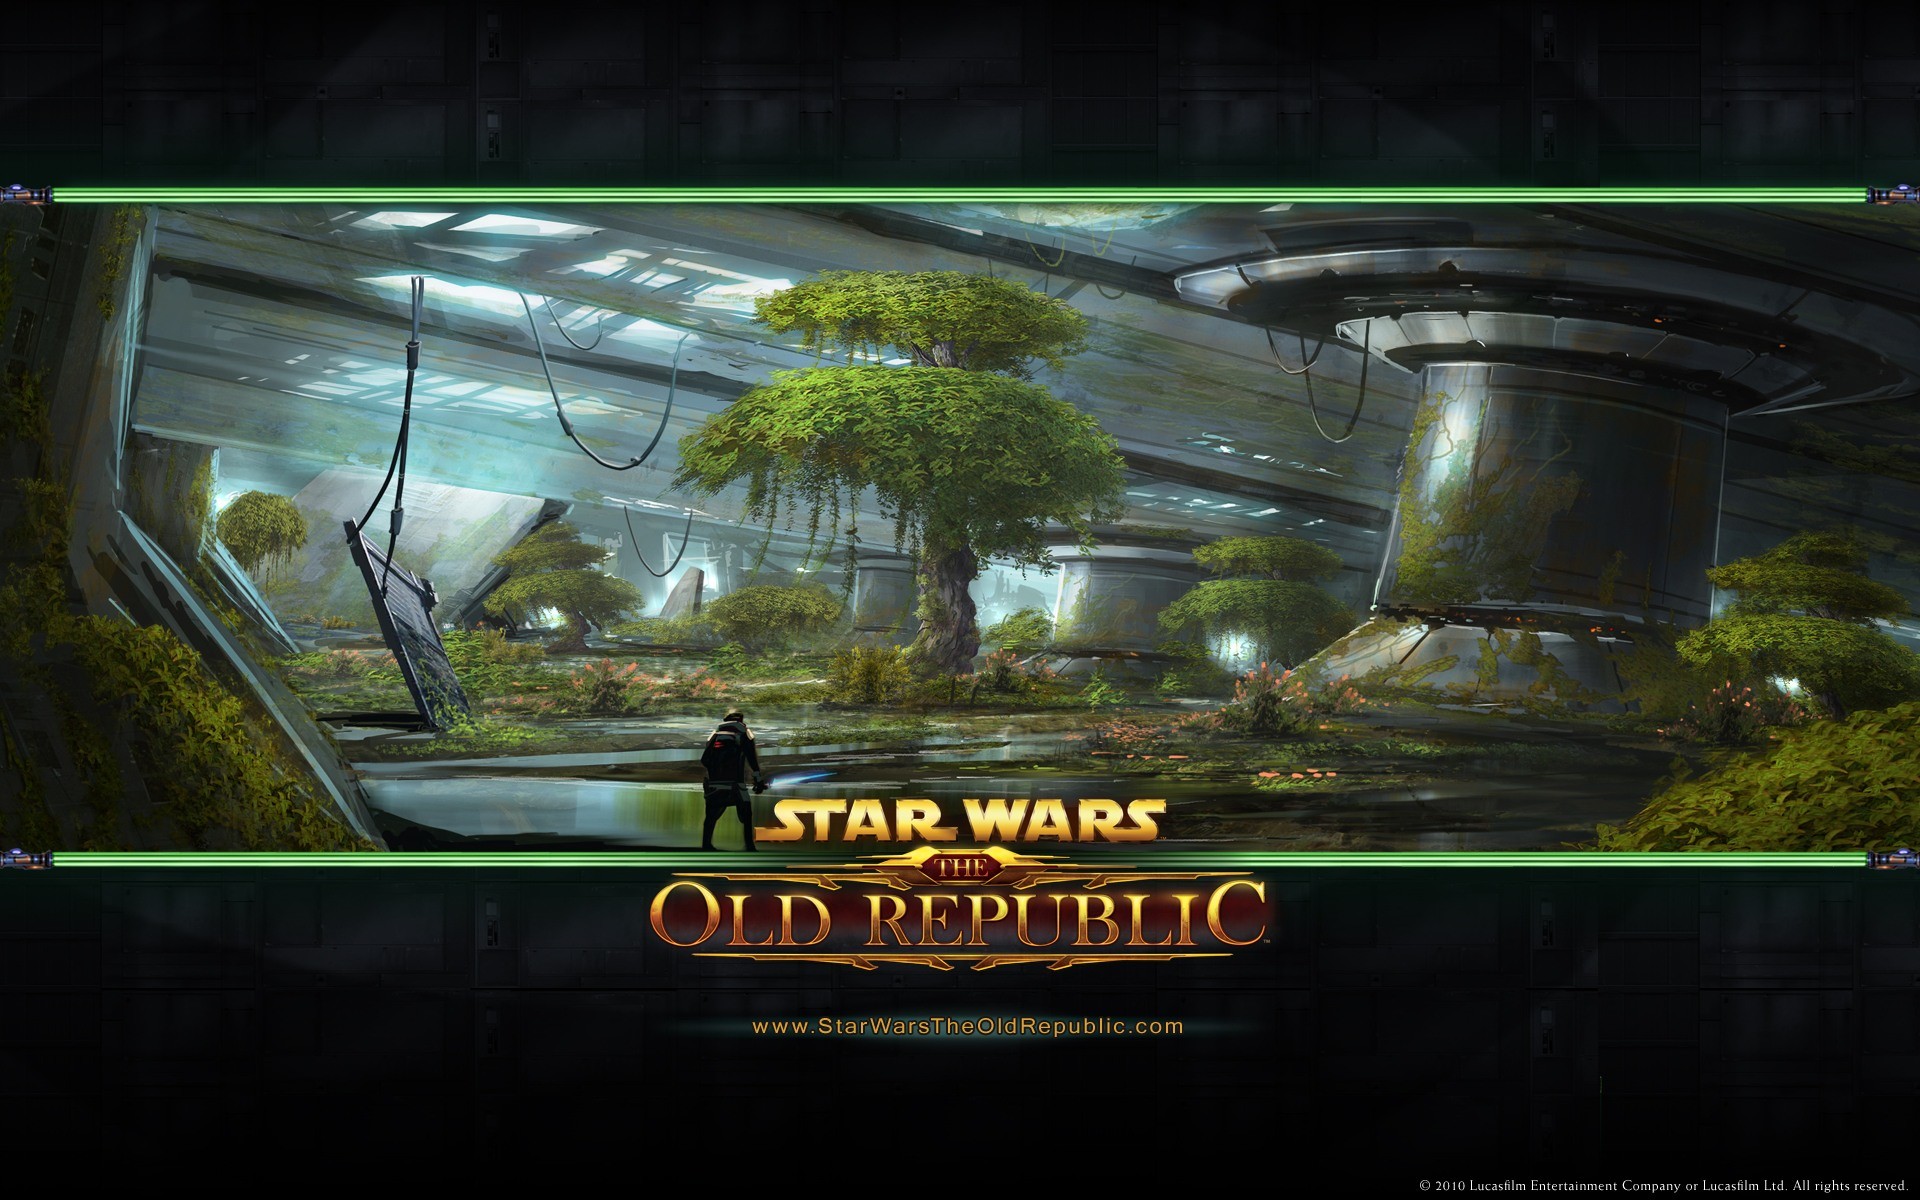 Star Wars: Old Republic wallpapers and stock photos